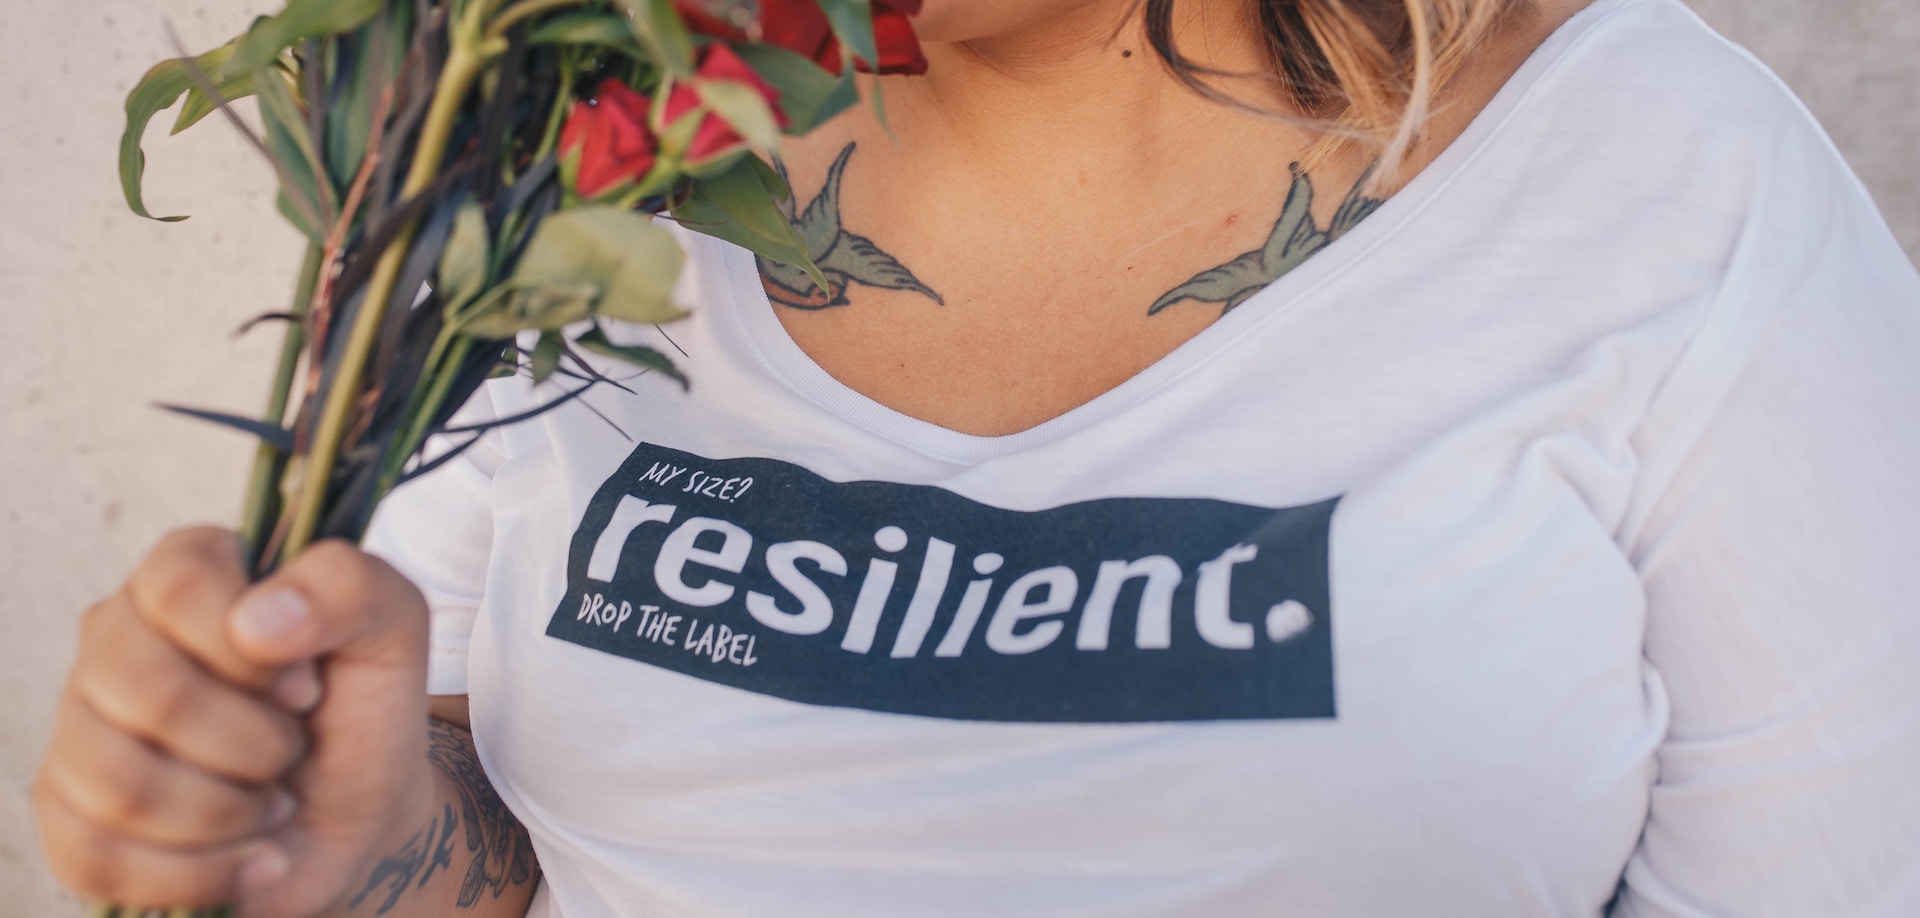 My size . . . Resilient!